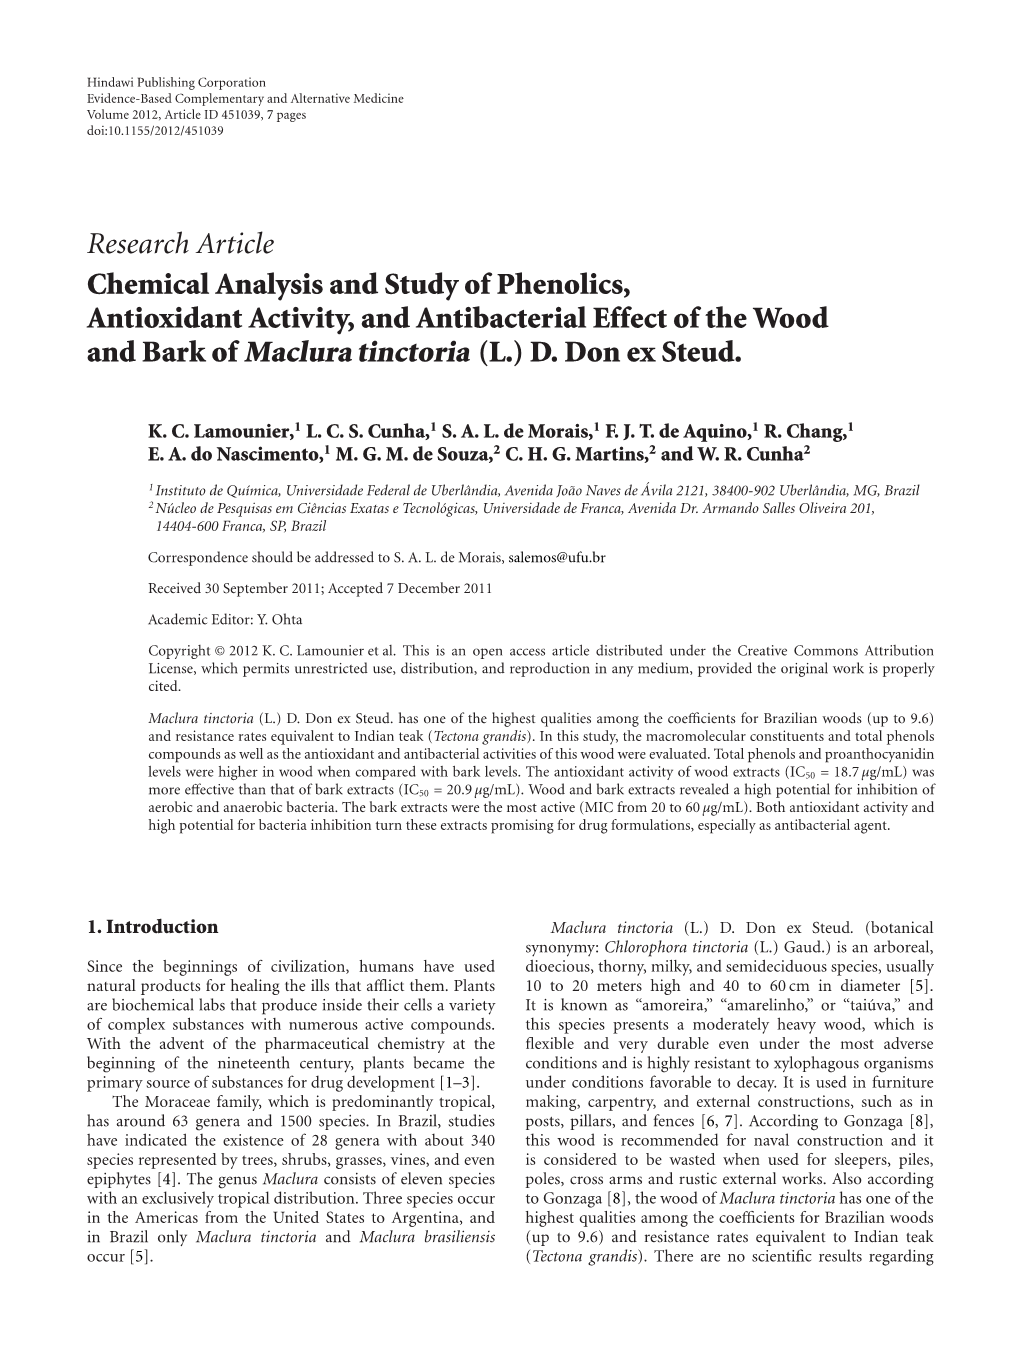 Chemical Analysis and Study of Phenolics, Antioxidant Activity, and Antibacterial Effect of the Wood and Bark of Maclura Tinctoria (L.) D